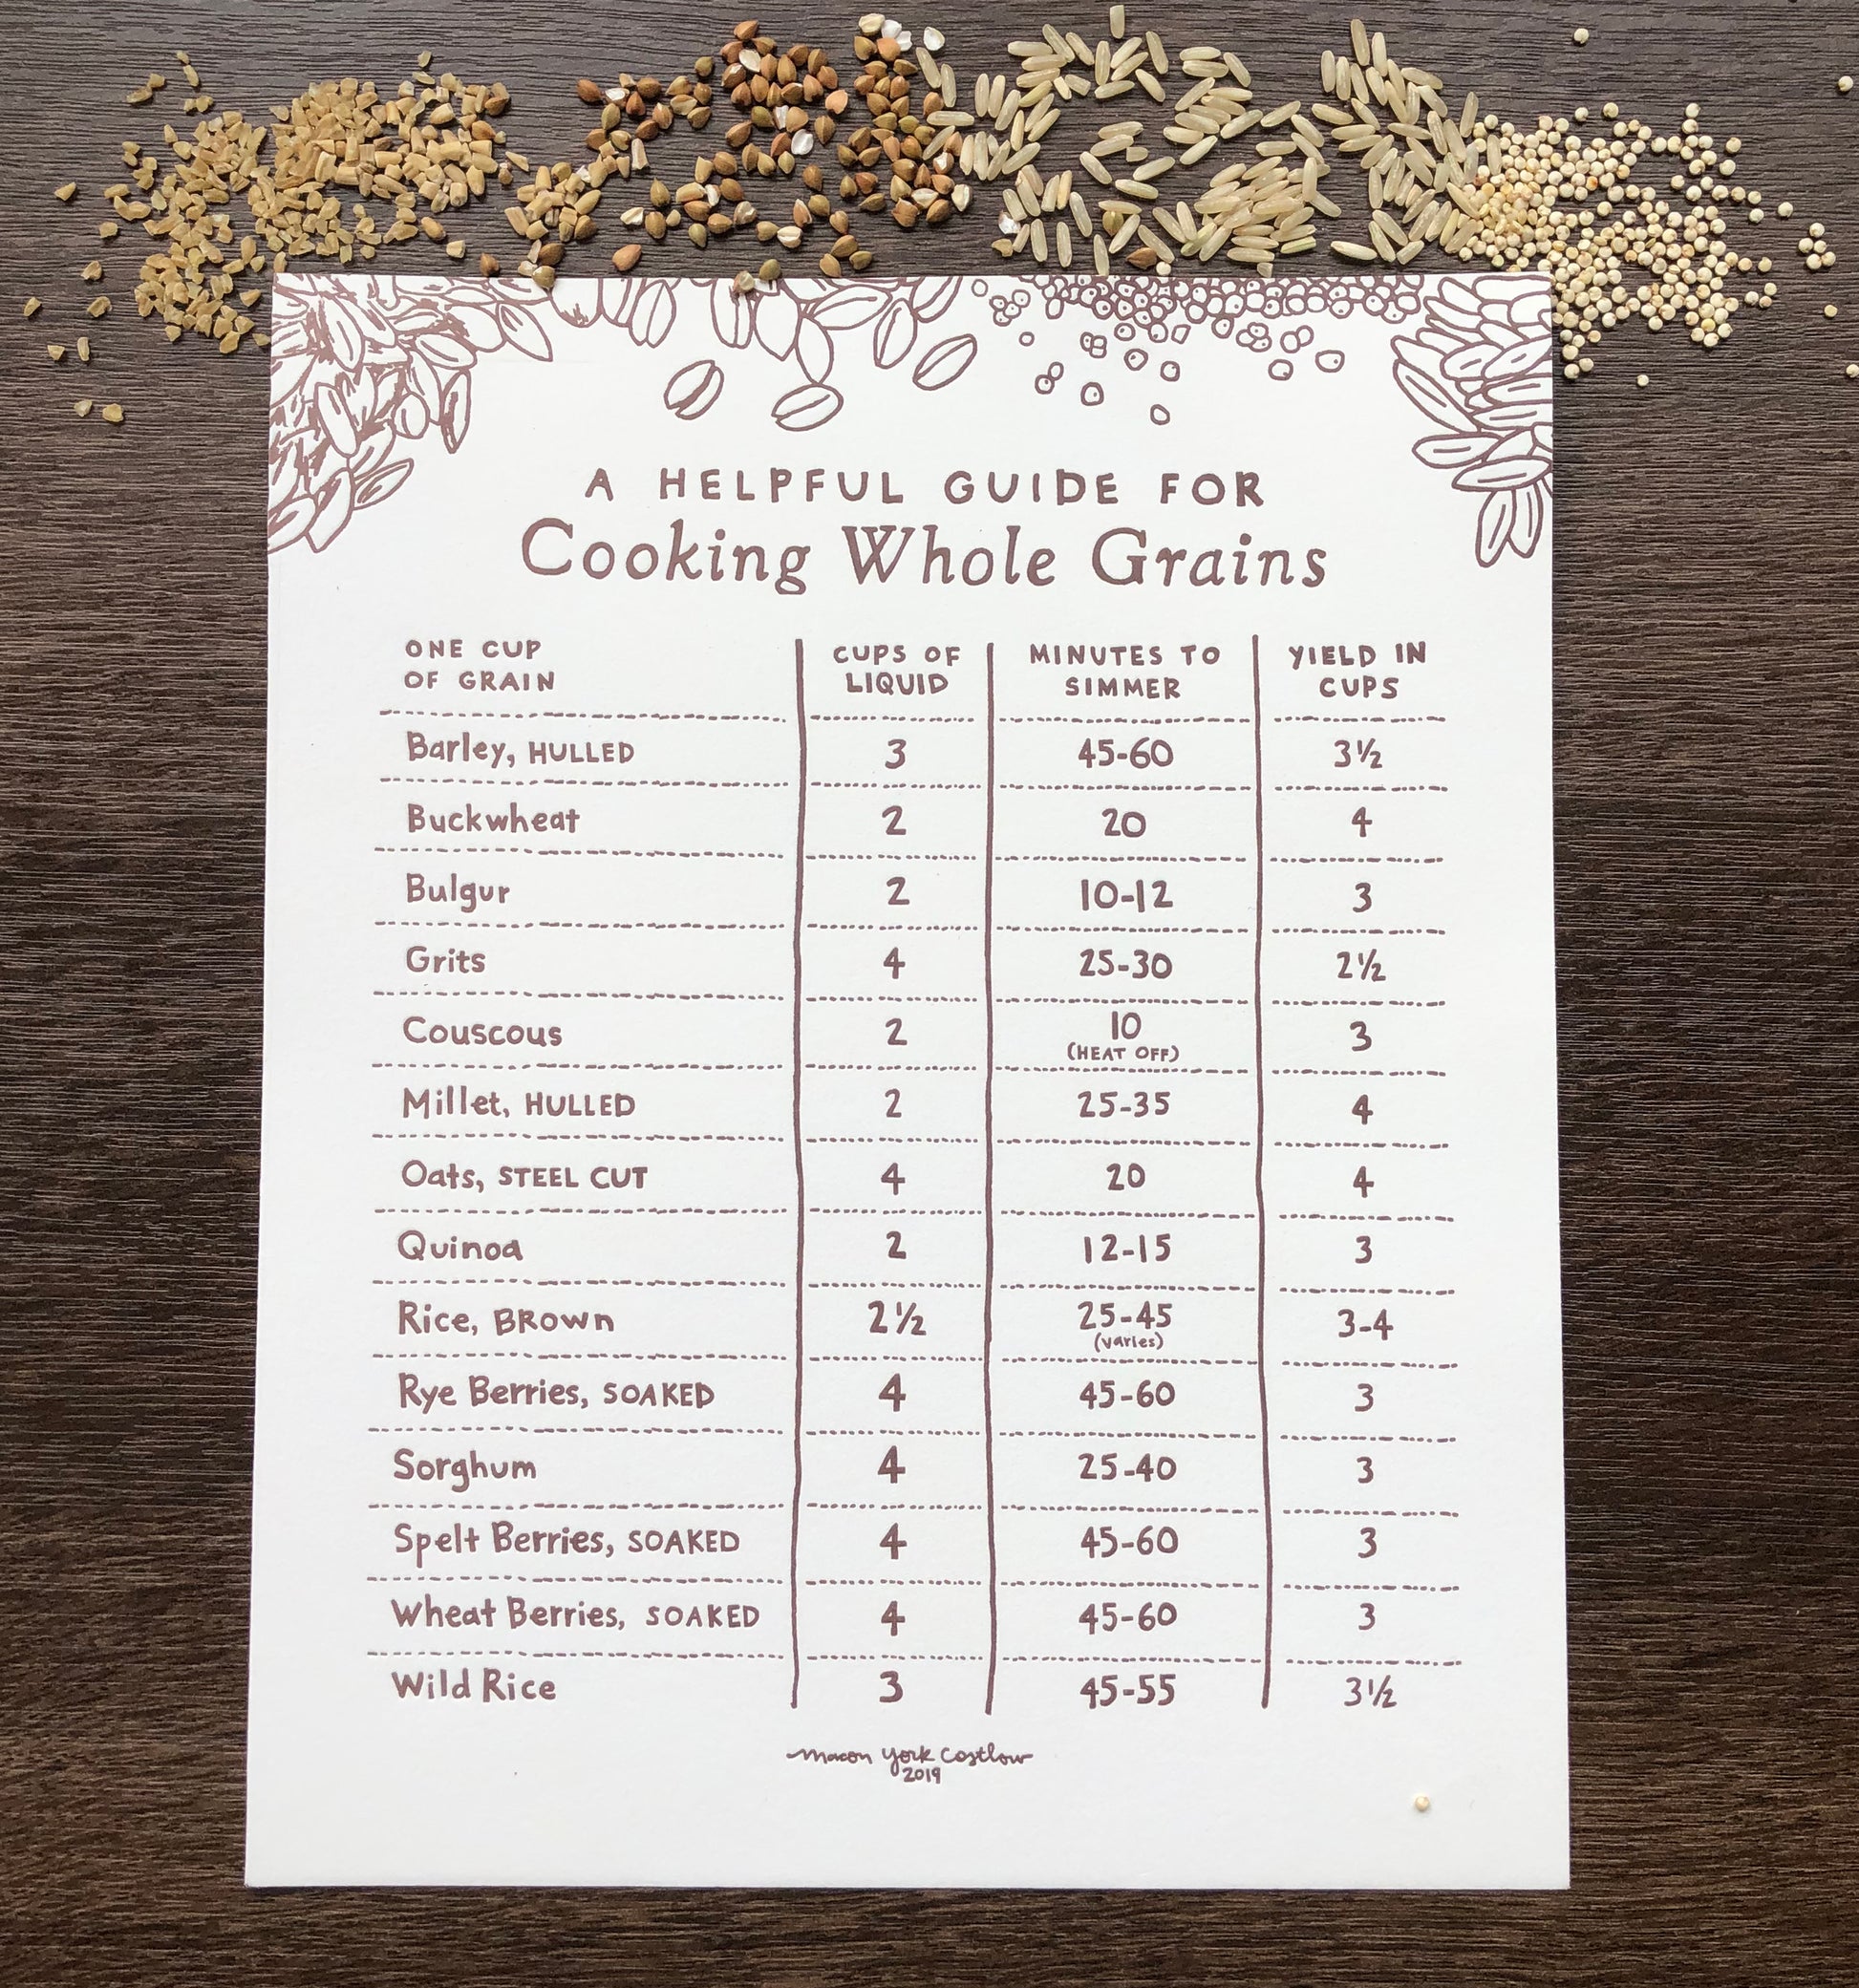 8x10 Letterpress Art Print - Helpful Guide to Cooking Whole Grains to hang in the kitchen to be a quick and easy reference for how much water to add to a cup of grains and how long to cook. Great gift for newlyweds, hostess gift, vegans and vegetarians, and more! Text is hand-drawn. Letterpress tactile texture.